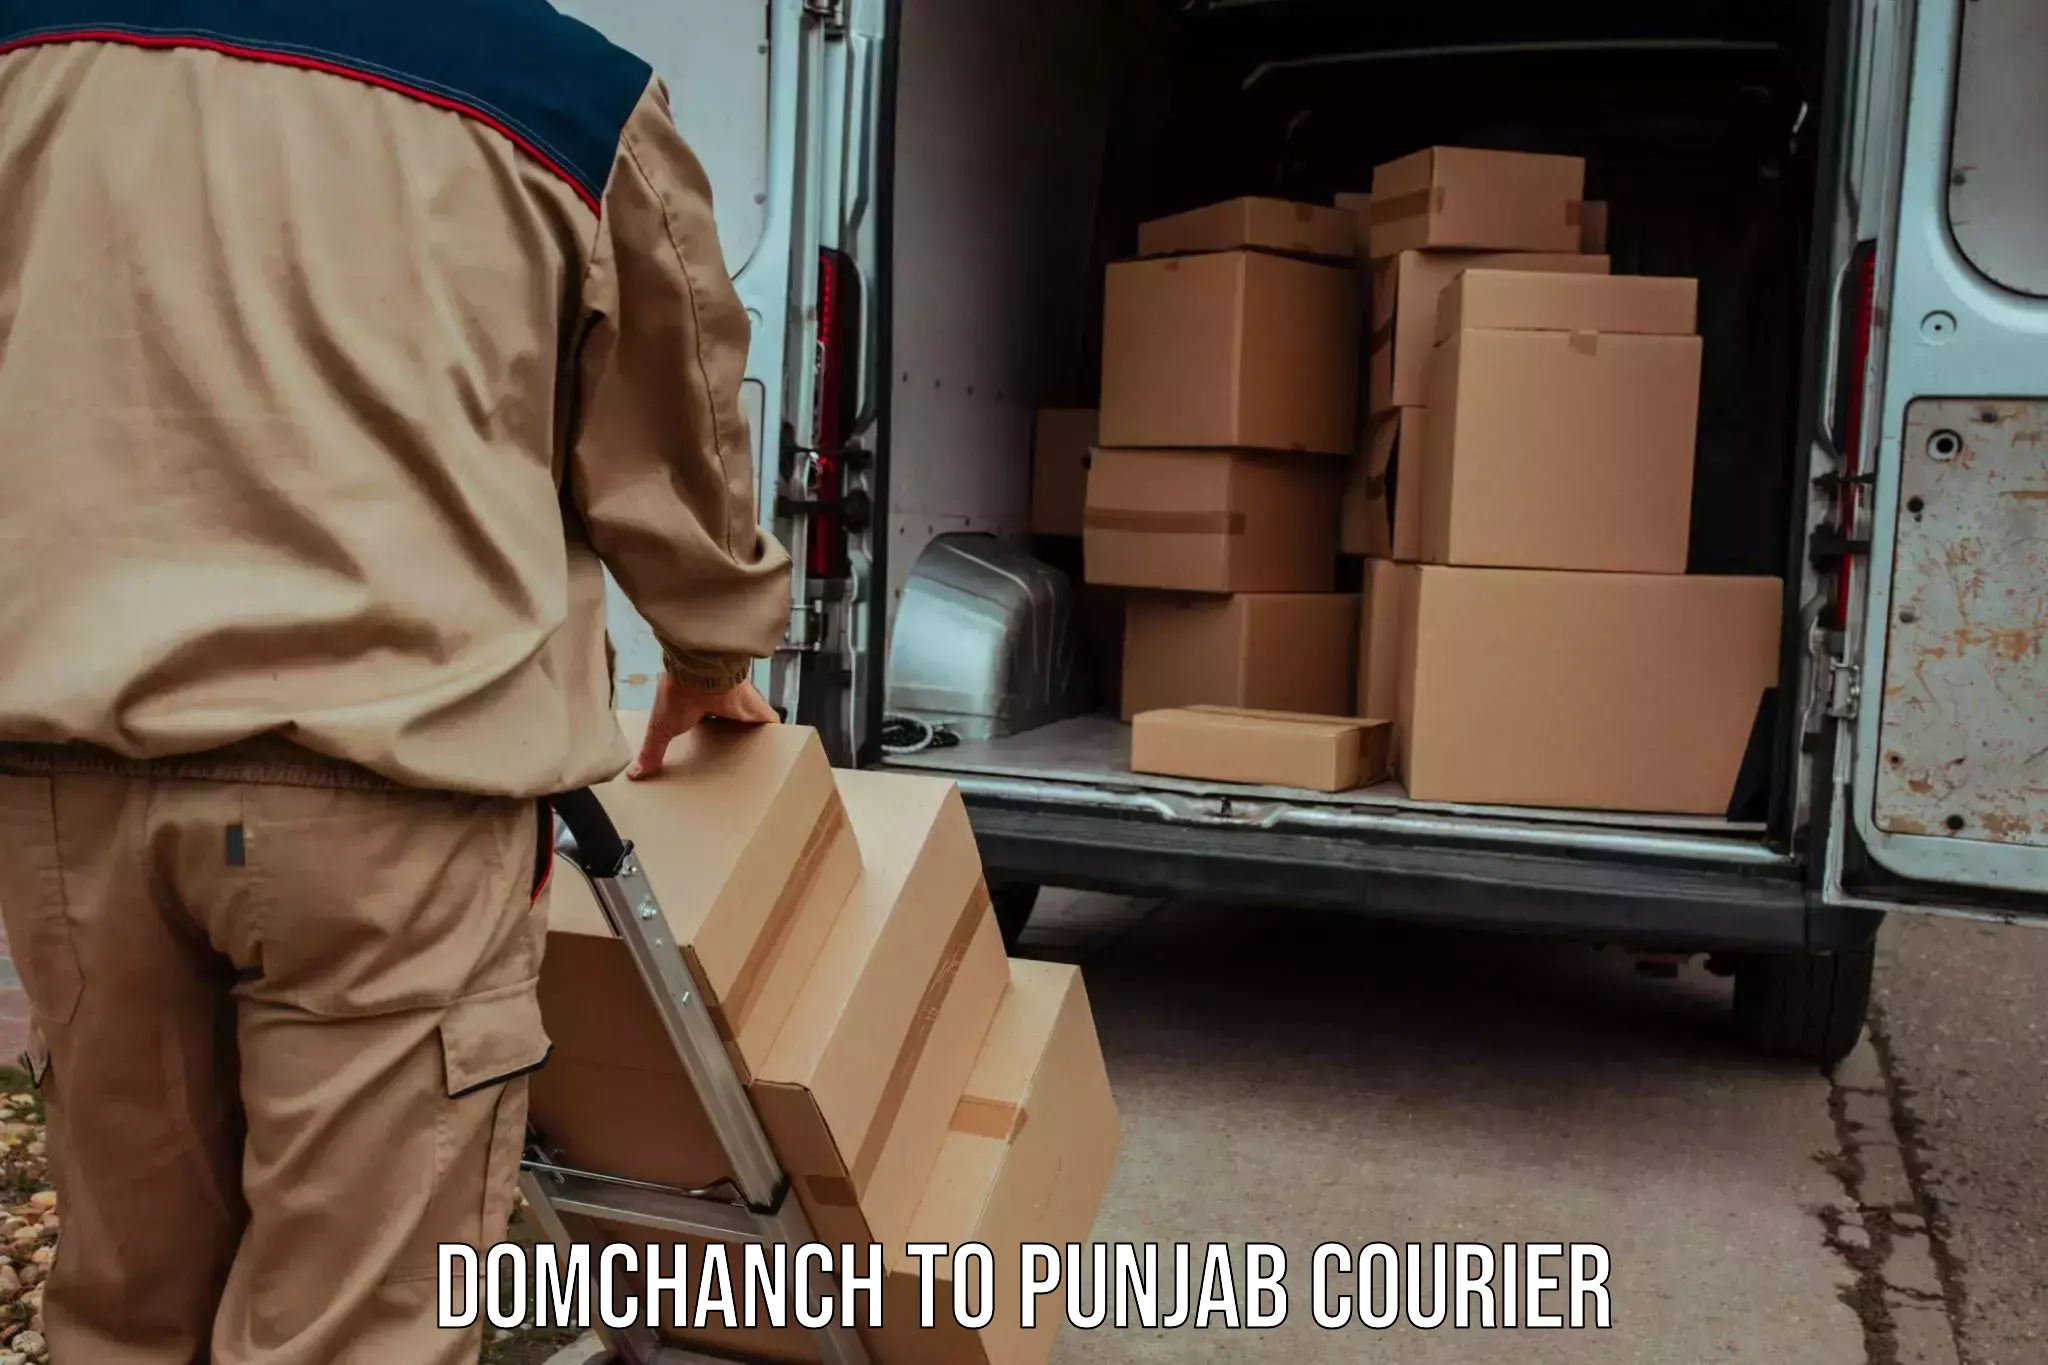 Reliable package handling Domchanch to Punjab